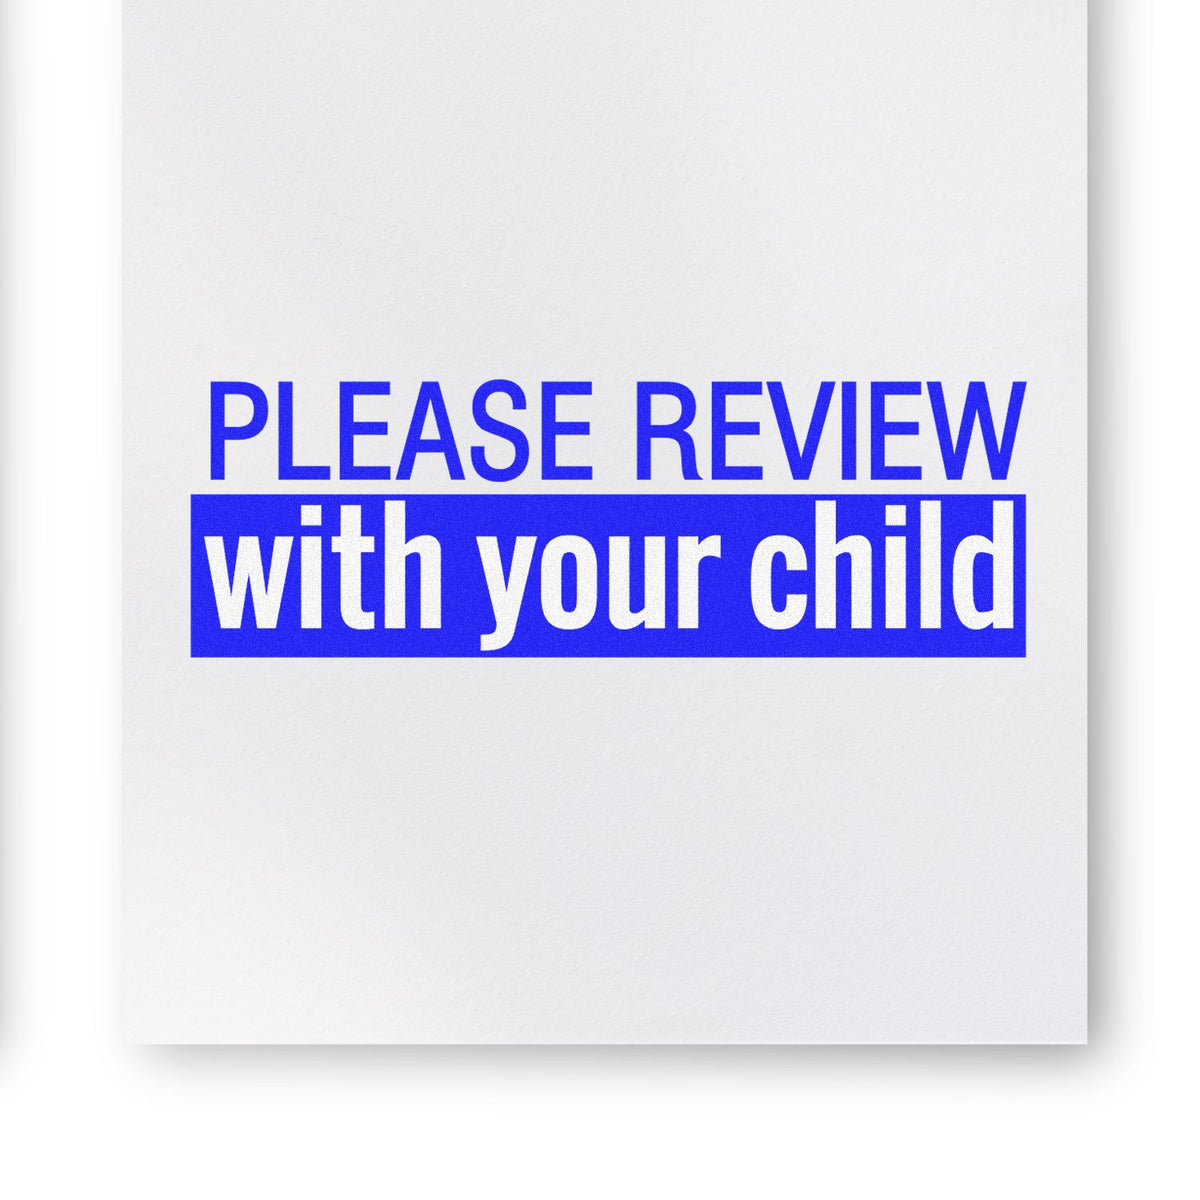 Please Review with your child Rubber Stamp In Use Photo